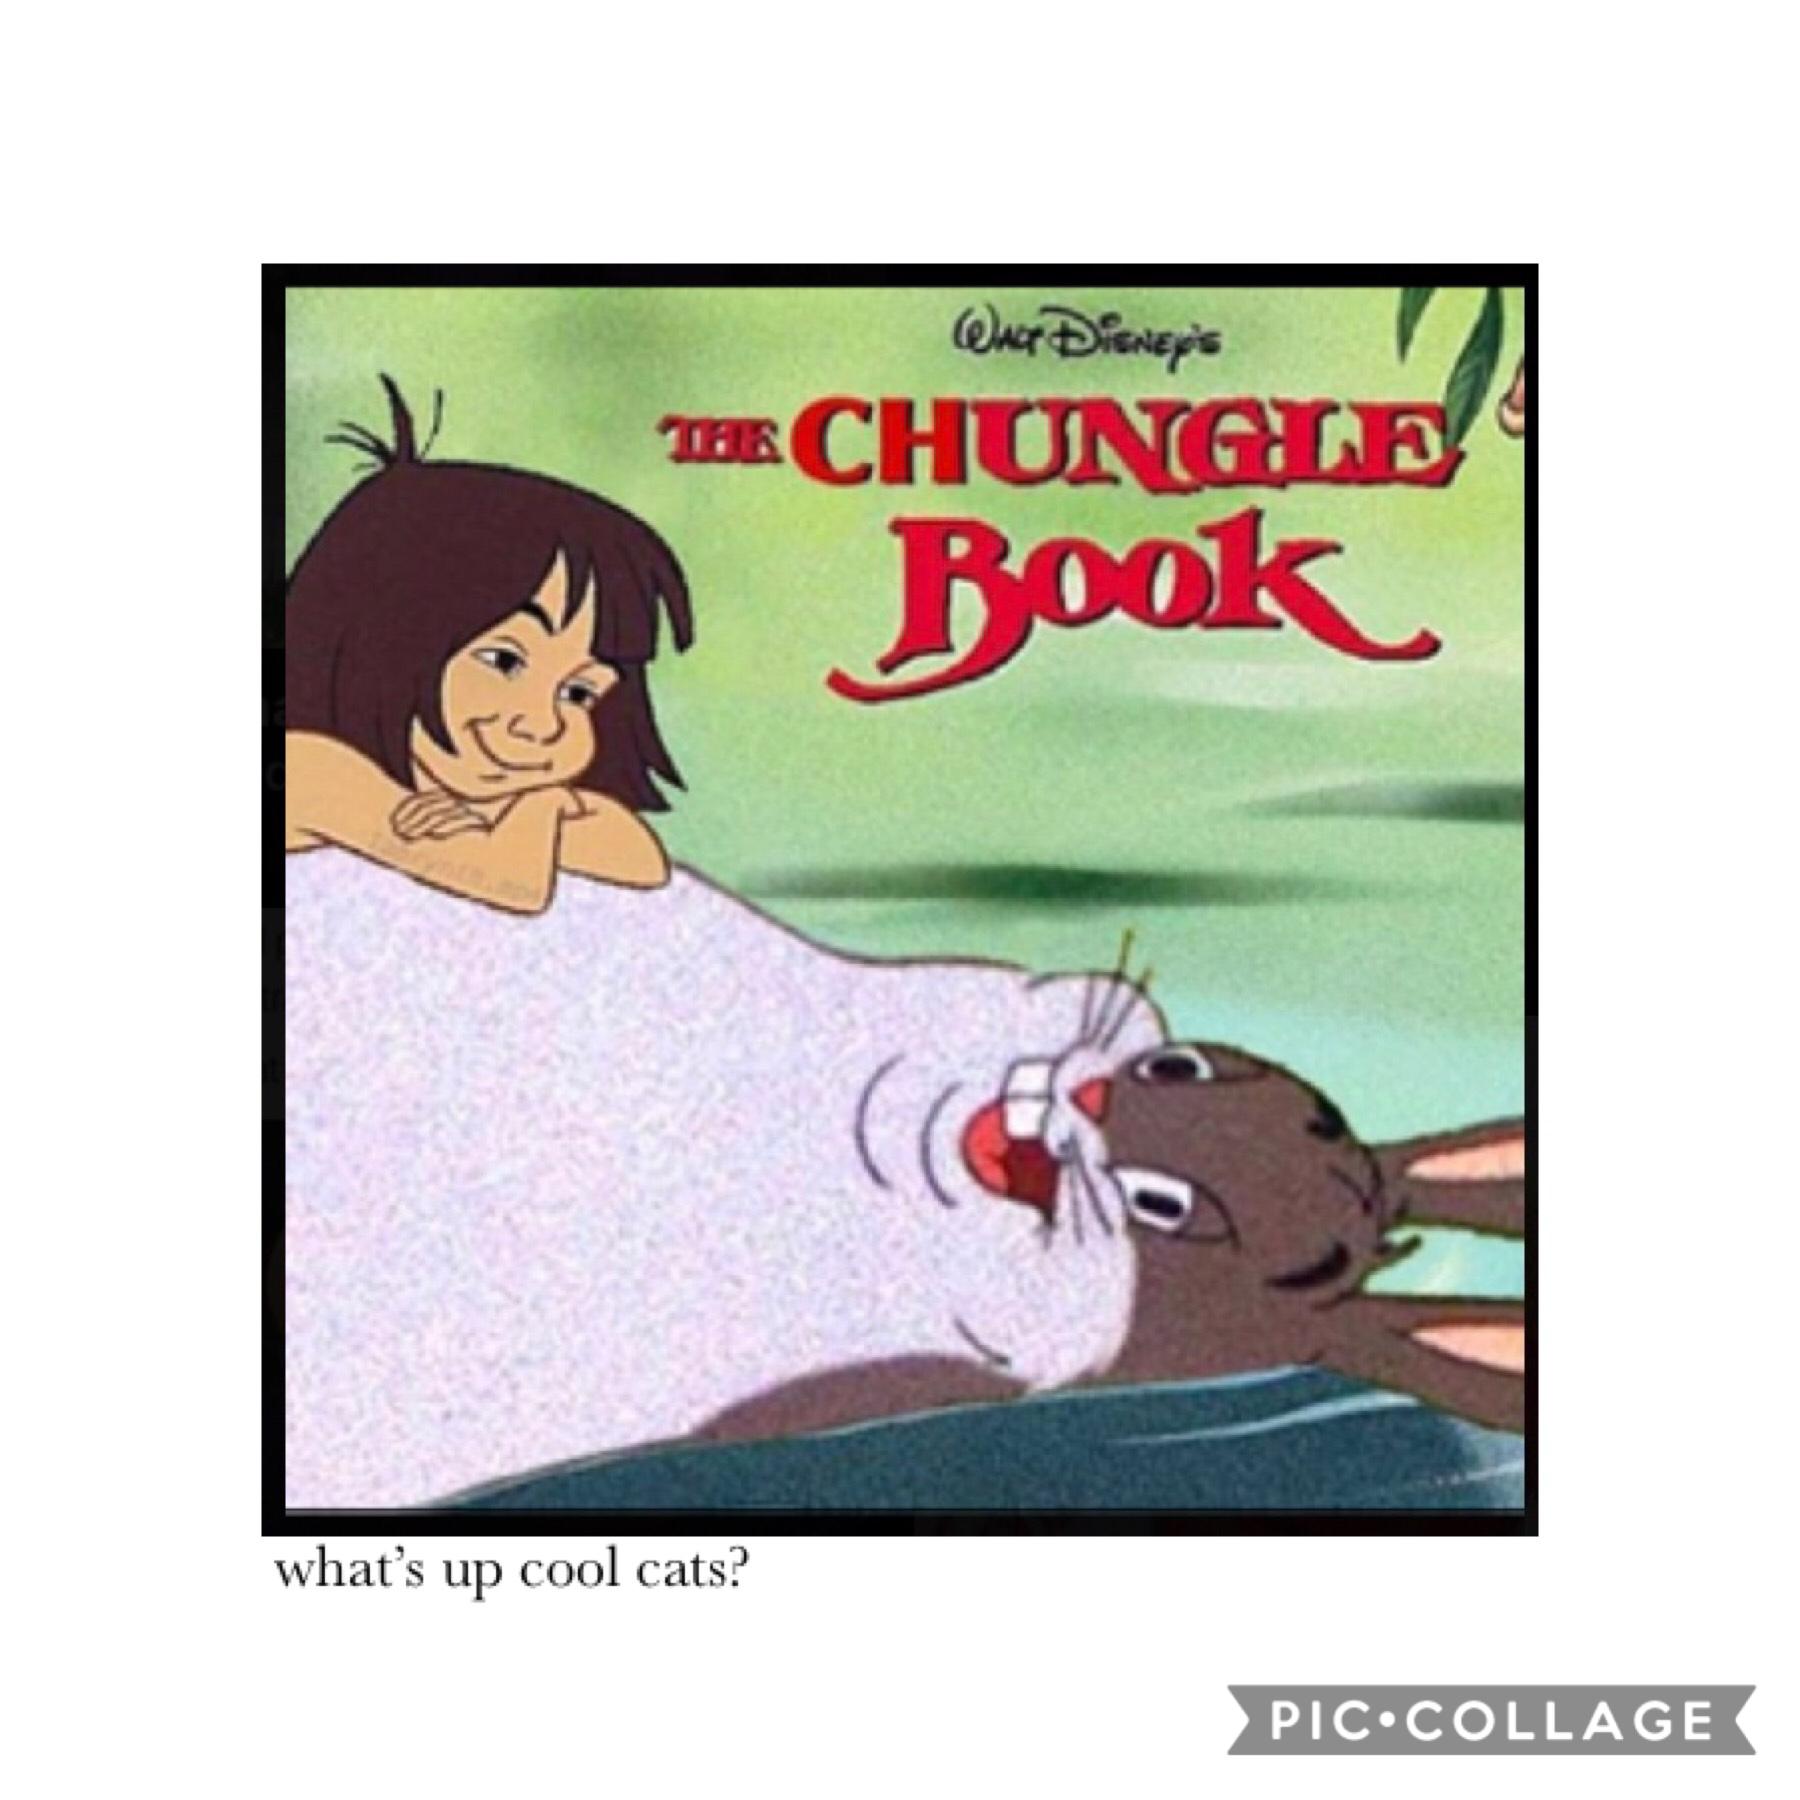 :)))))))

Big Chungus was an enormous men at my school so

I had an algebra test yesterday and I think it went okay??
